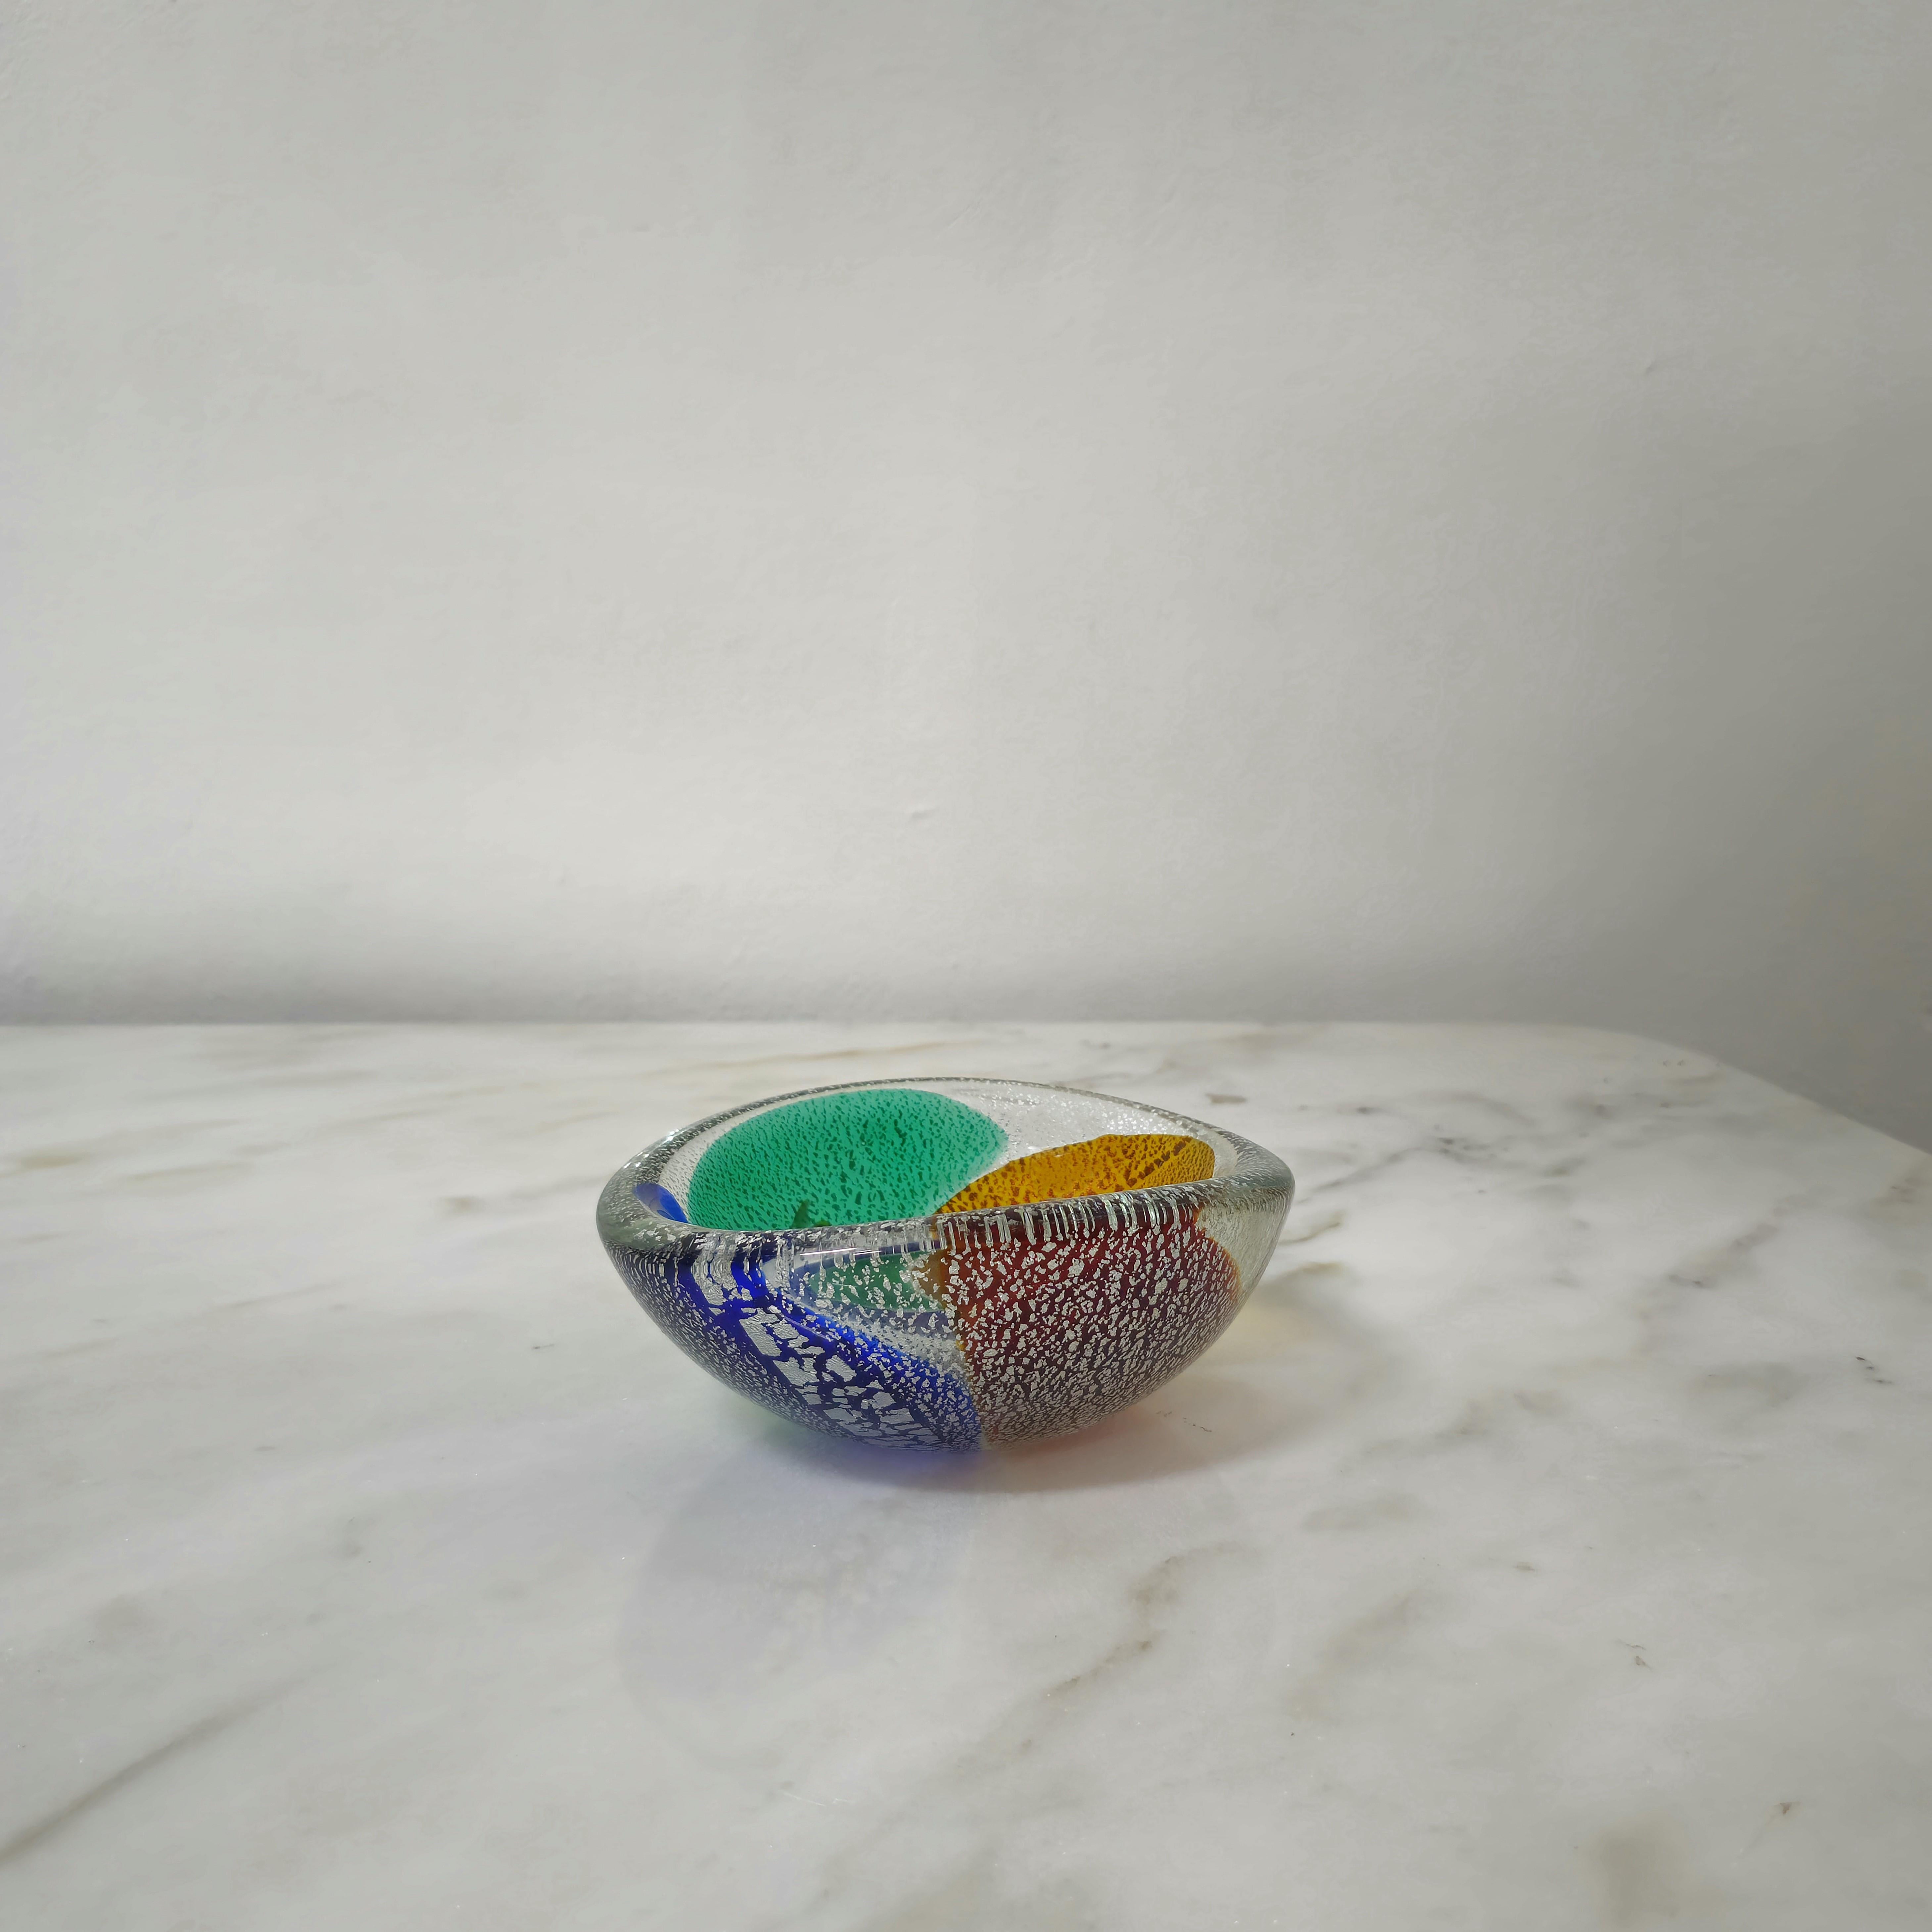 Decorative bowl/pocket tray made of submerged Murano glass with a semispherical body decorated with silvering and shades in shades of blue, green, caramel and mustard. Dino Martens, Italy 70s.



Note: We try to offer our customers an excellent